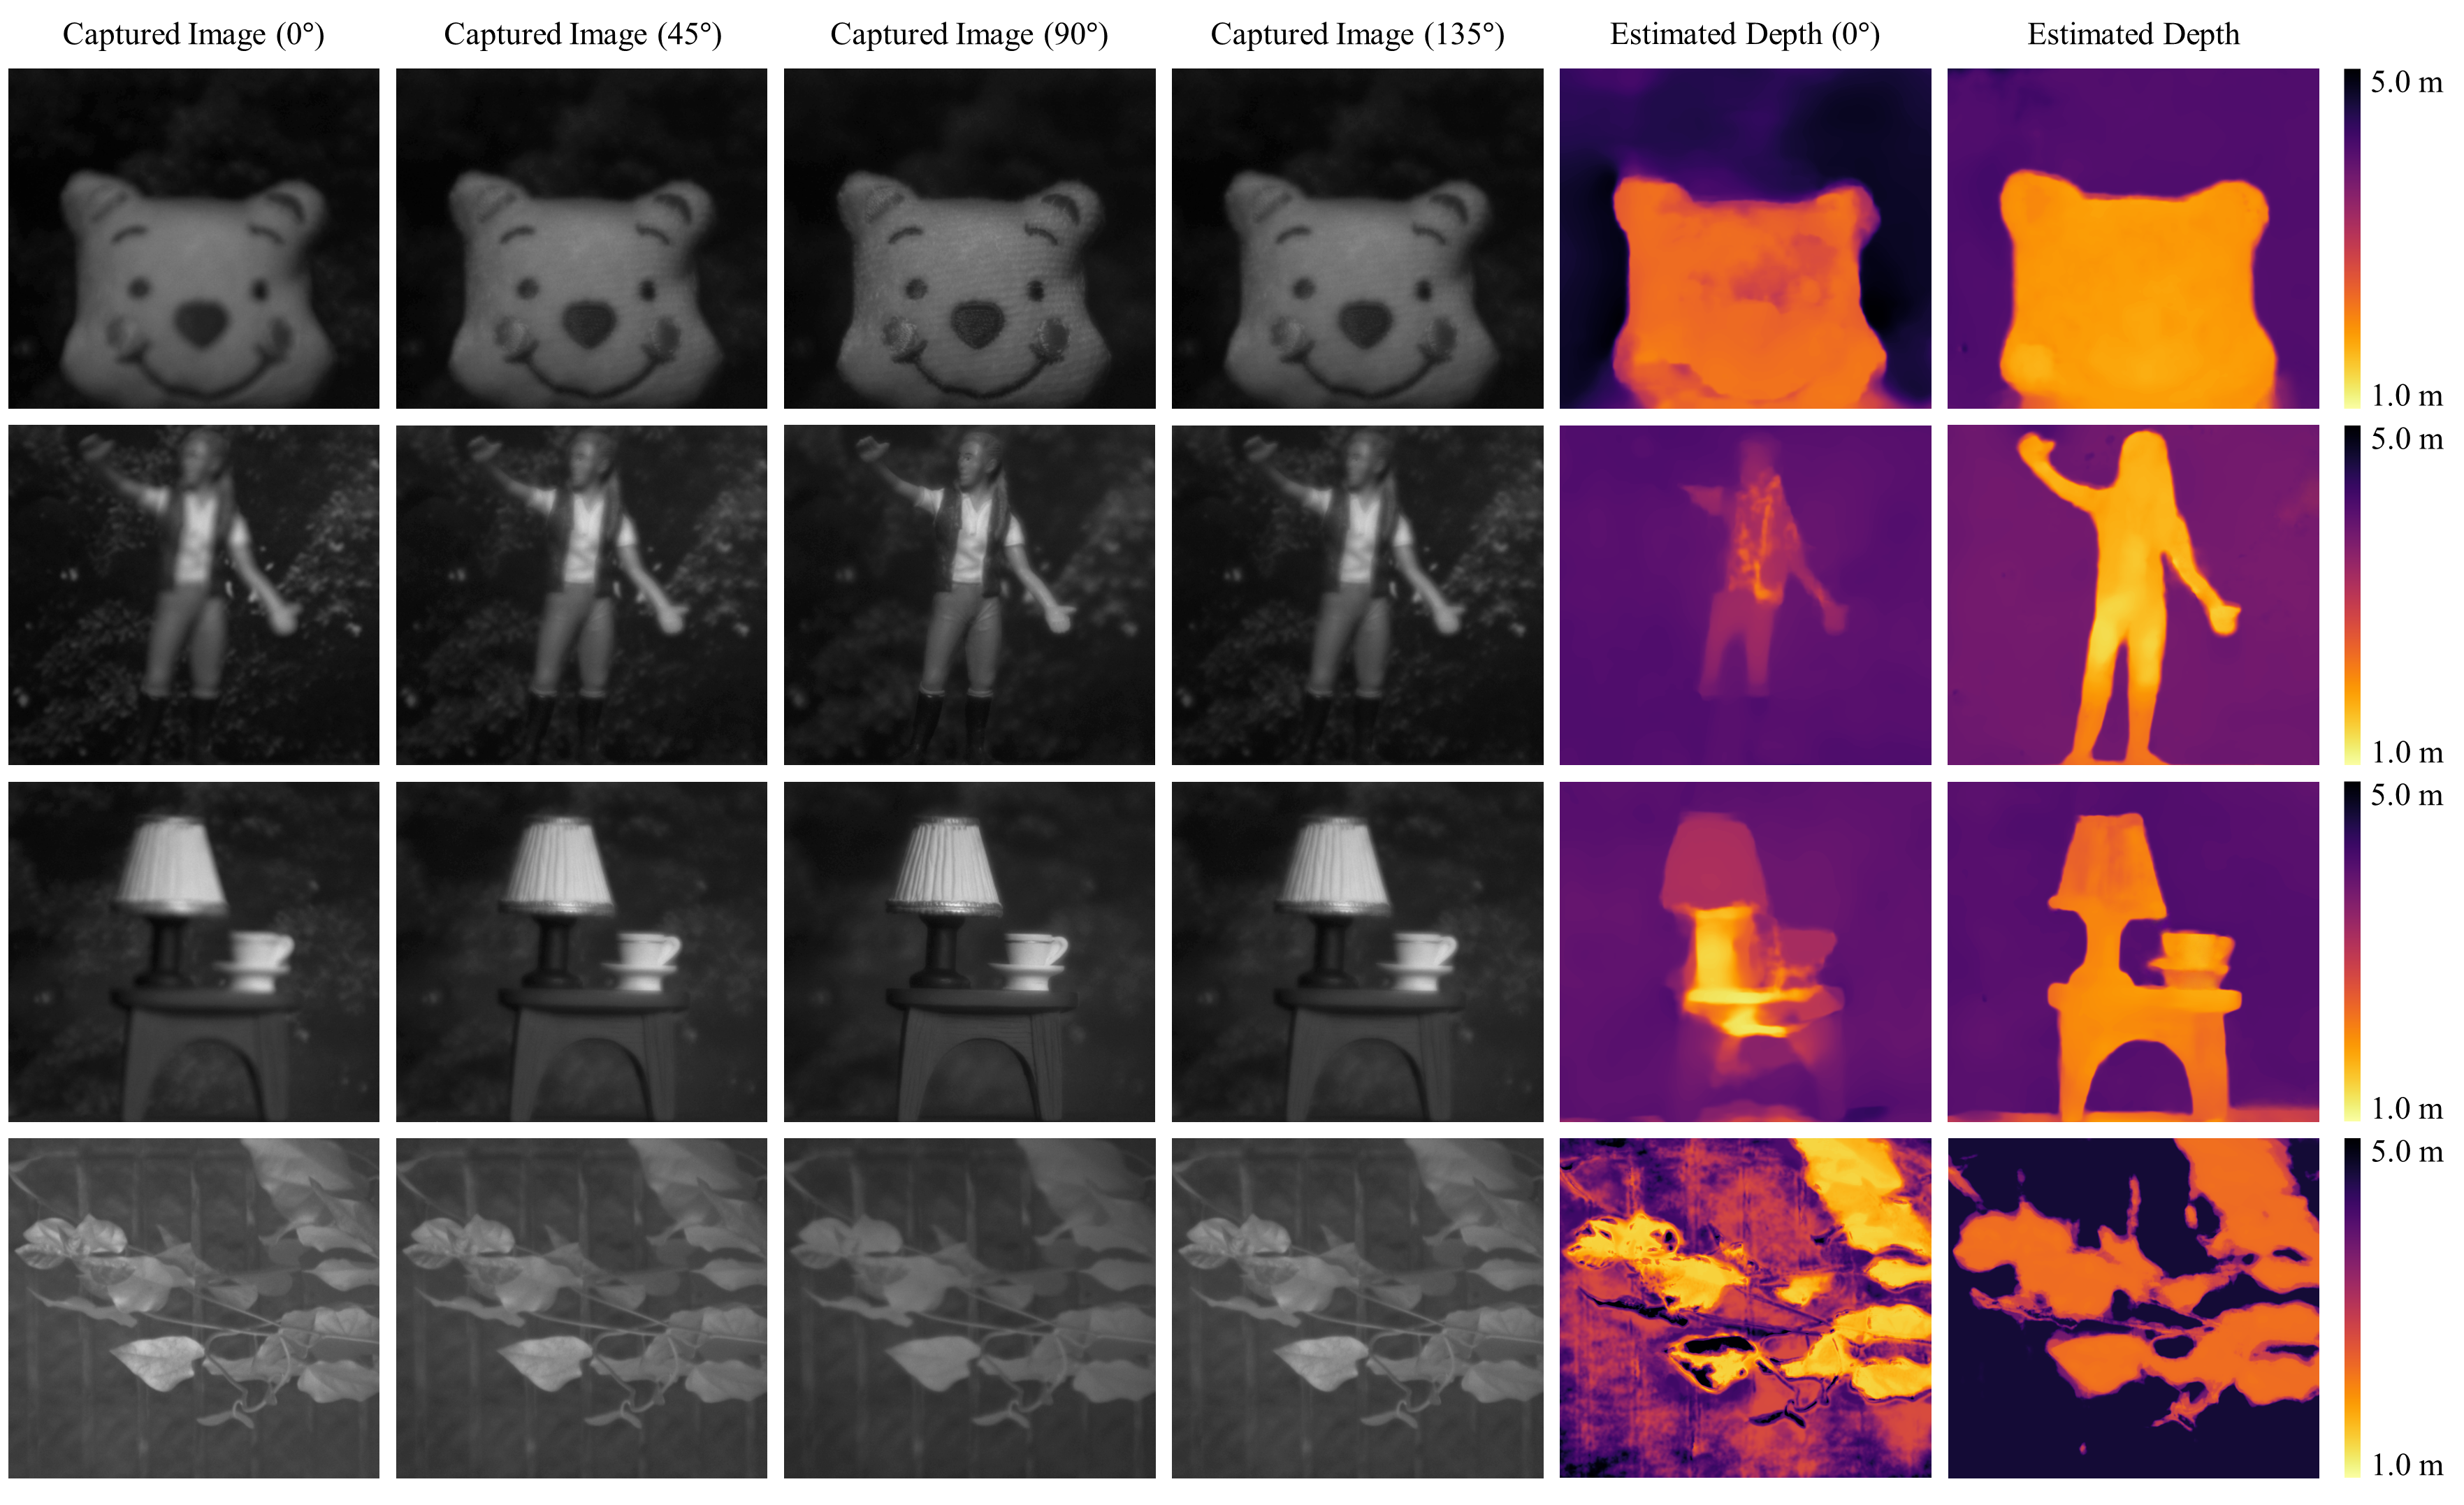 Figure 9. Experimental results on real capture data.